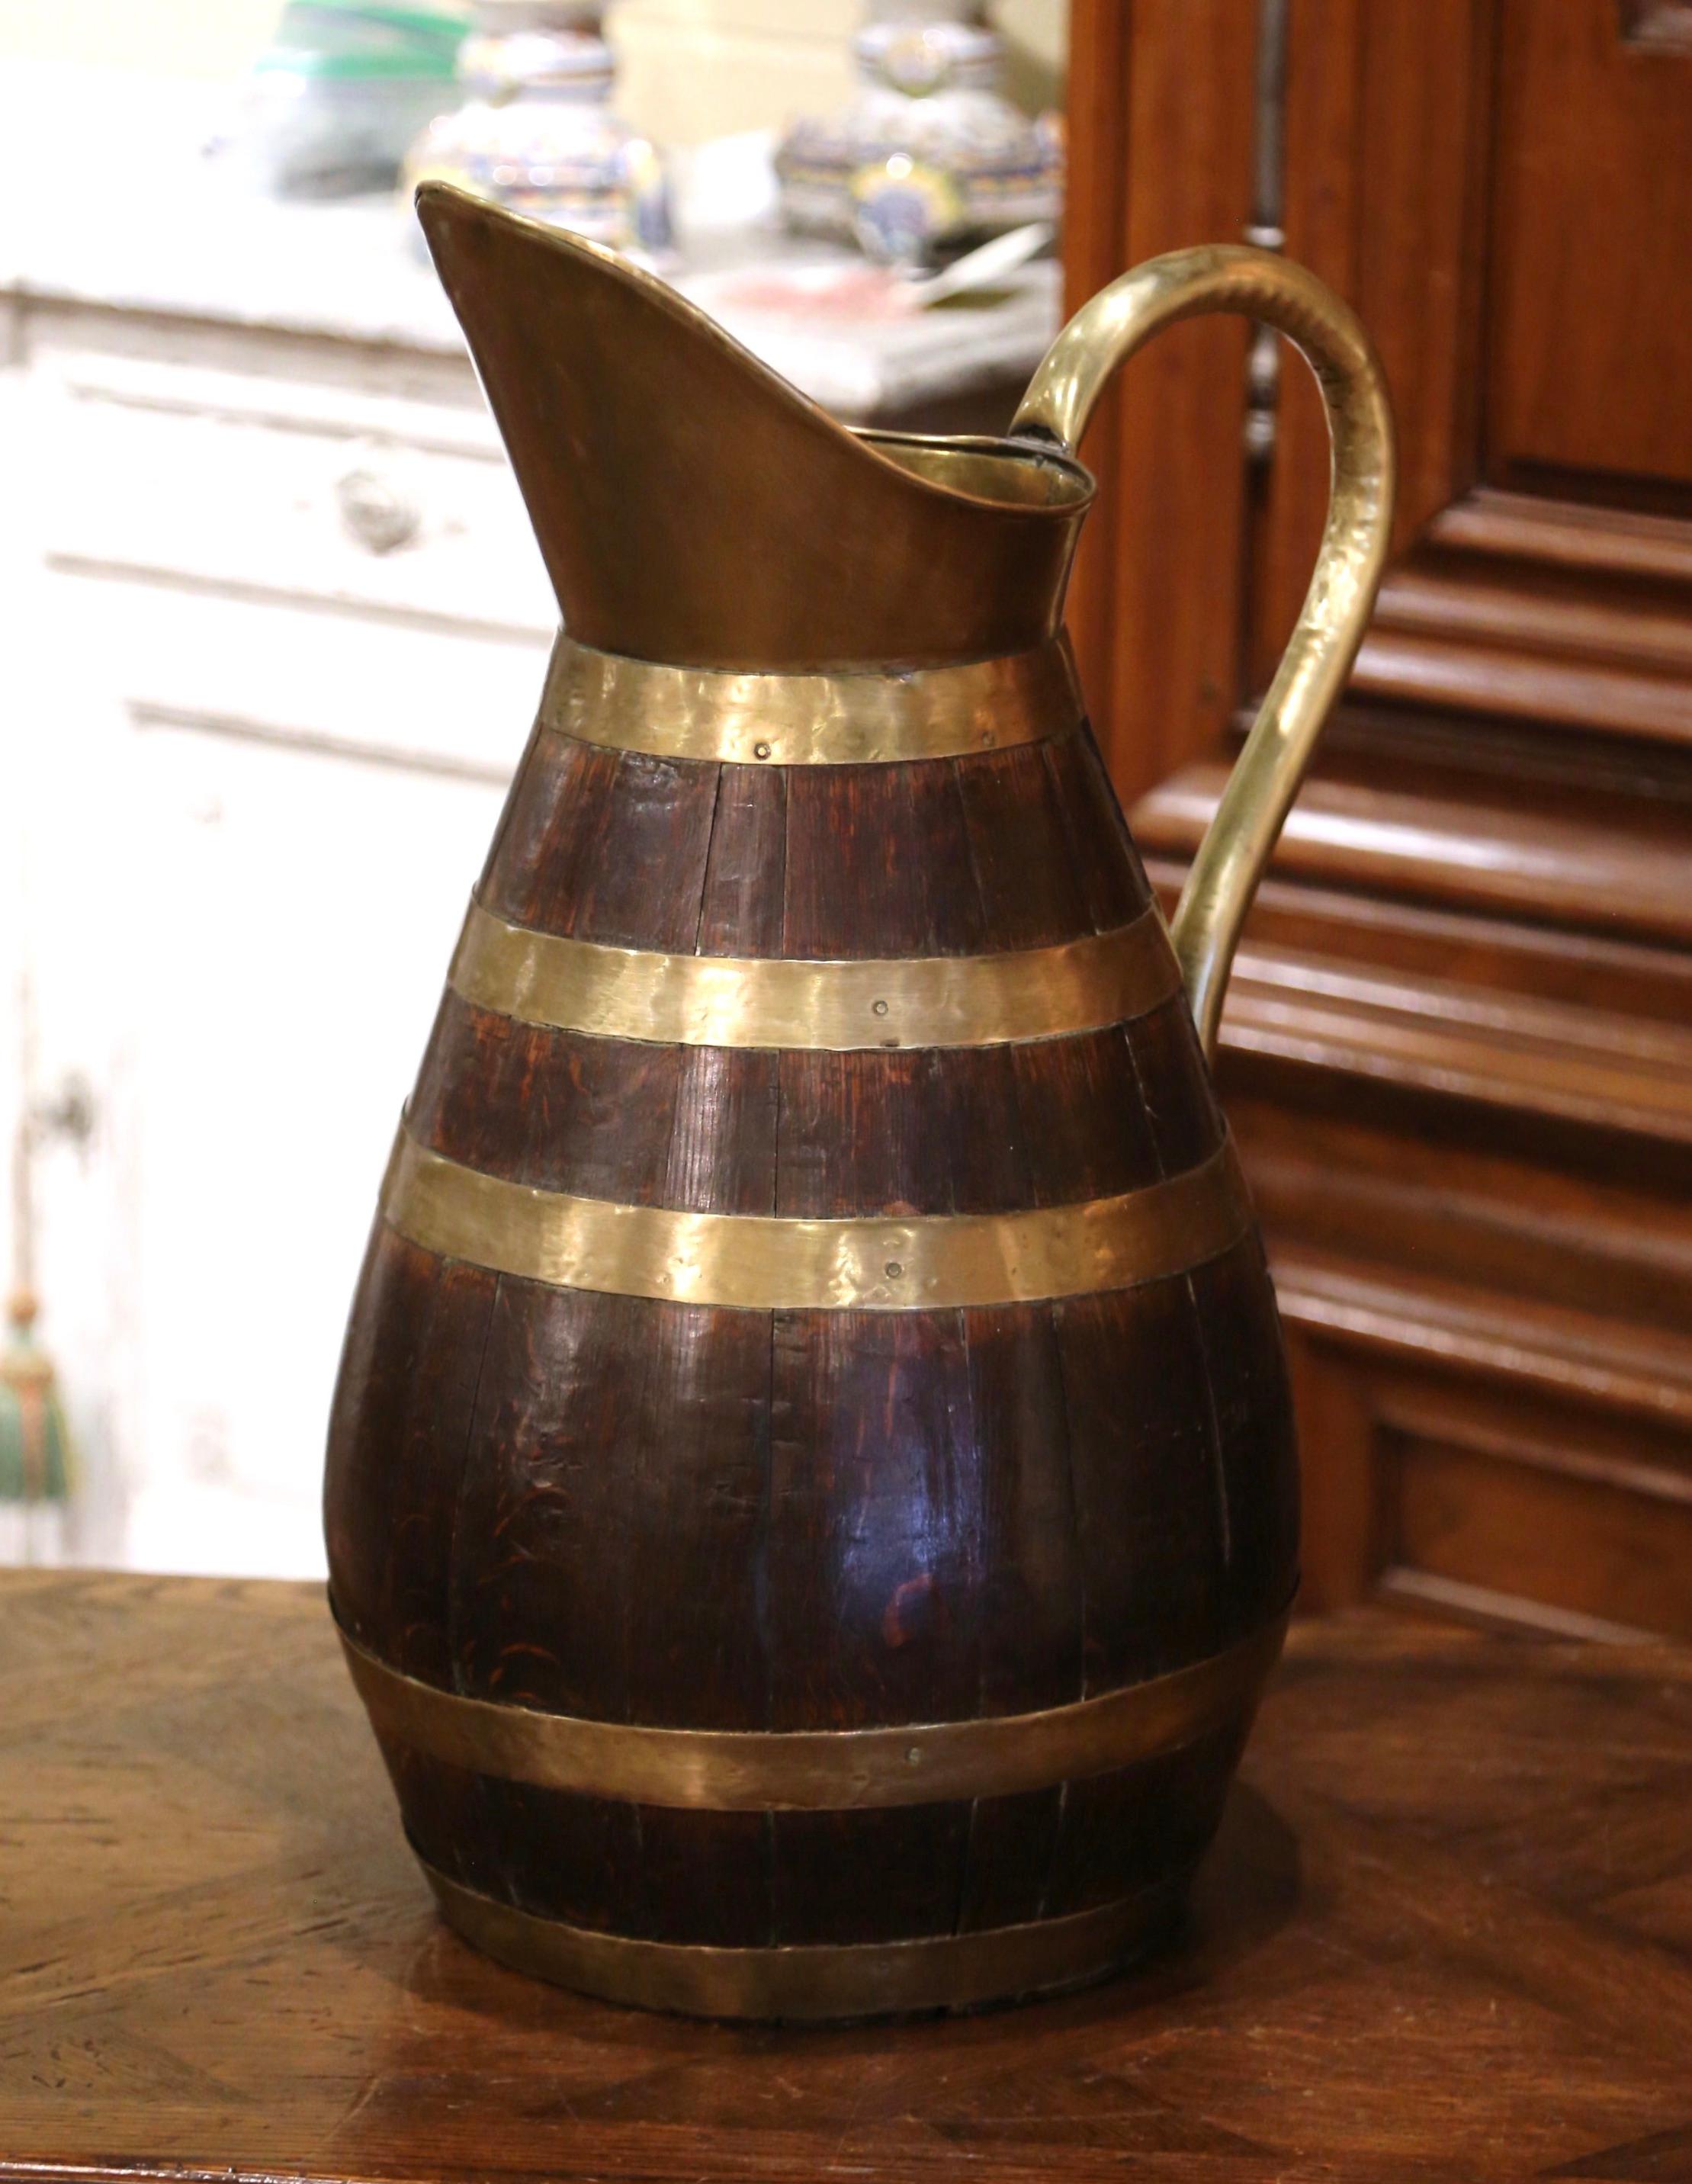 Accessorize your wine cellar or wet bar with this antique cider pitcher jug; crafted in Normandy France circa 1870, the pitcher is made of barrel oak decorated with polished brass rings. The cider pitcher, further embellished with a brass handle, is